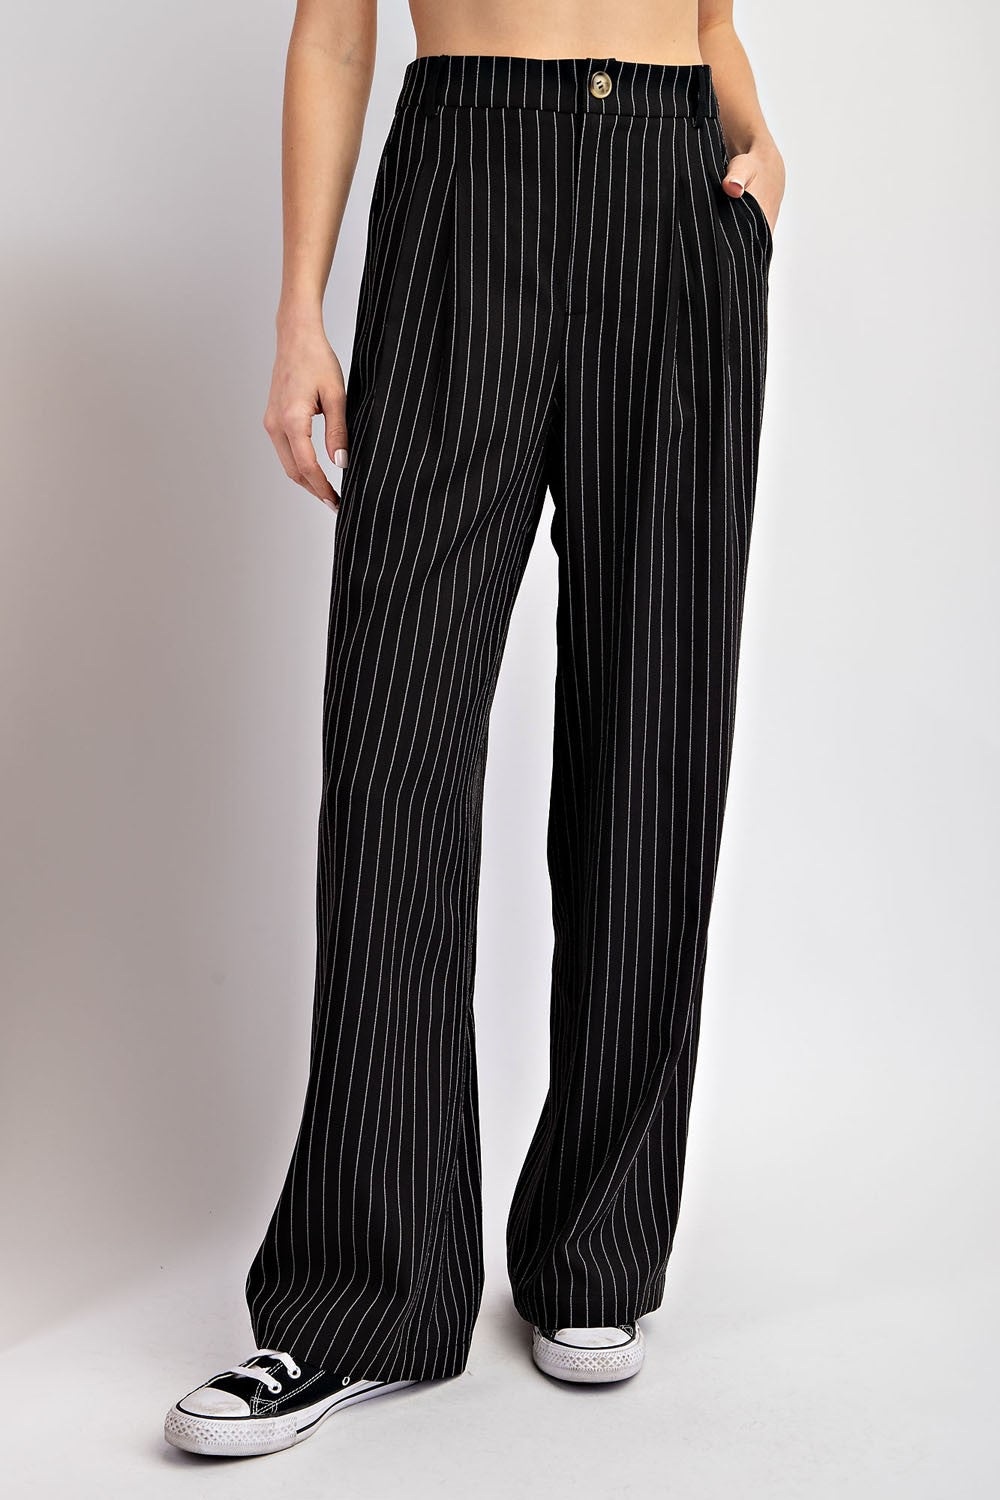 Whitney Pinstriped Straight Leg Pant in Black